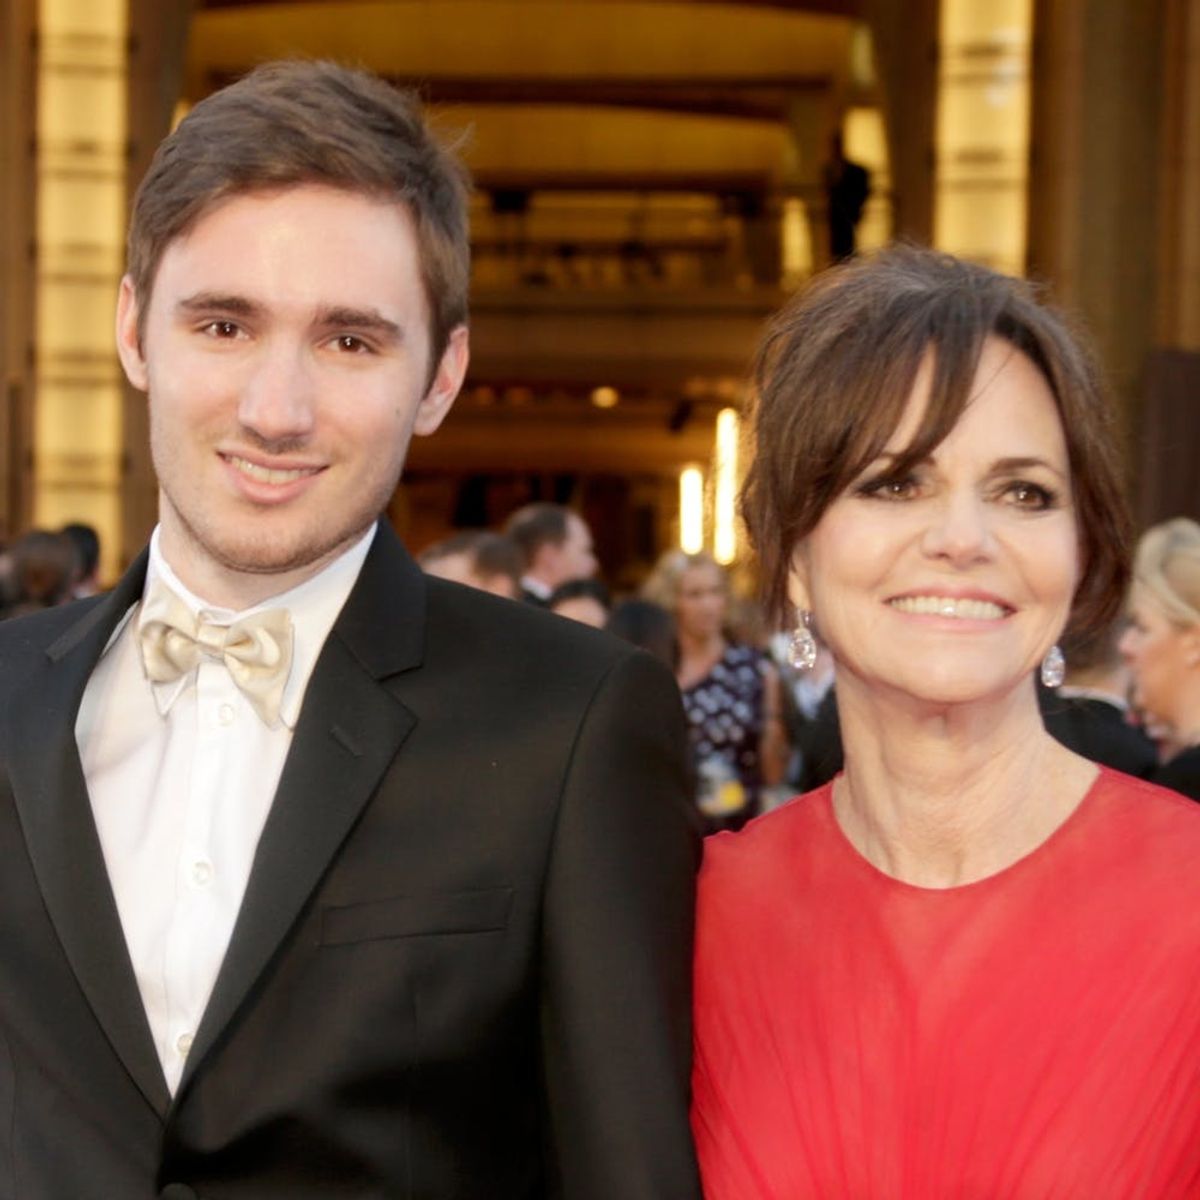 Sally Field Went Full Mom Trying to Hook Up Her Son With Olympic Figure Skater Adam Rippon